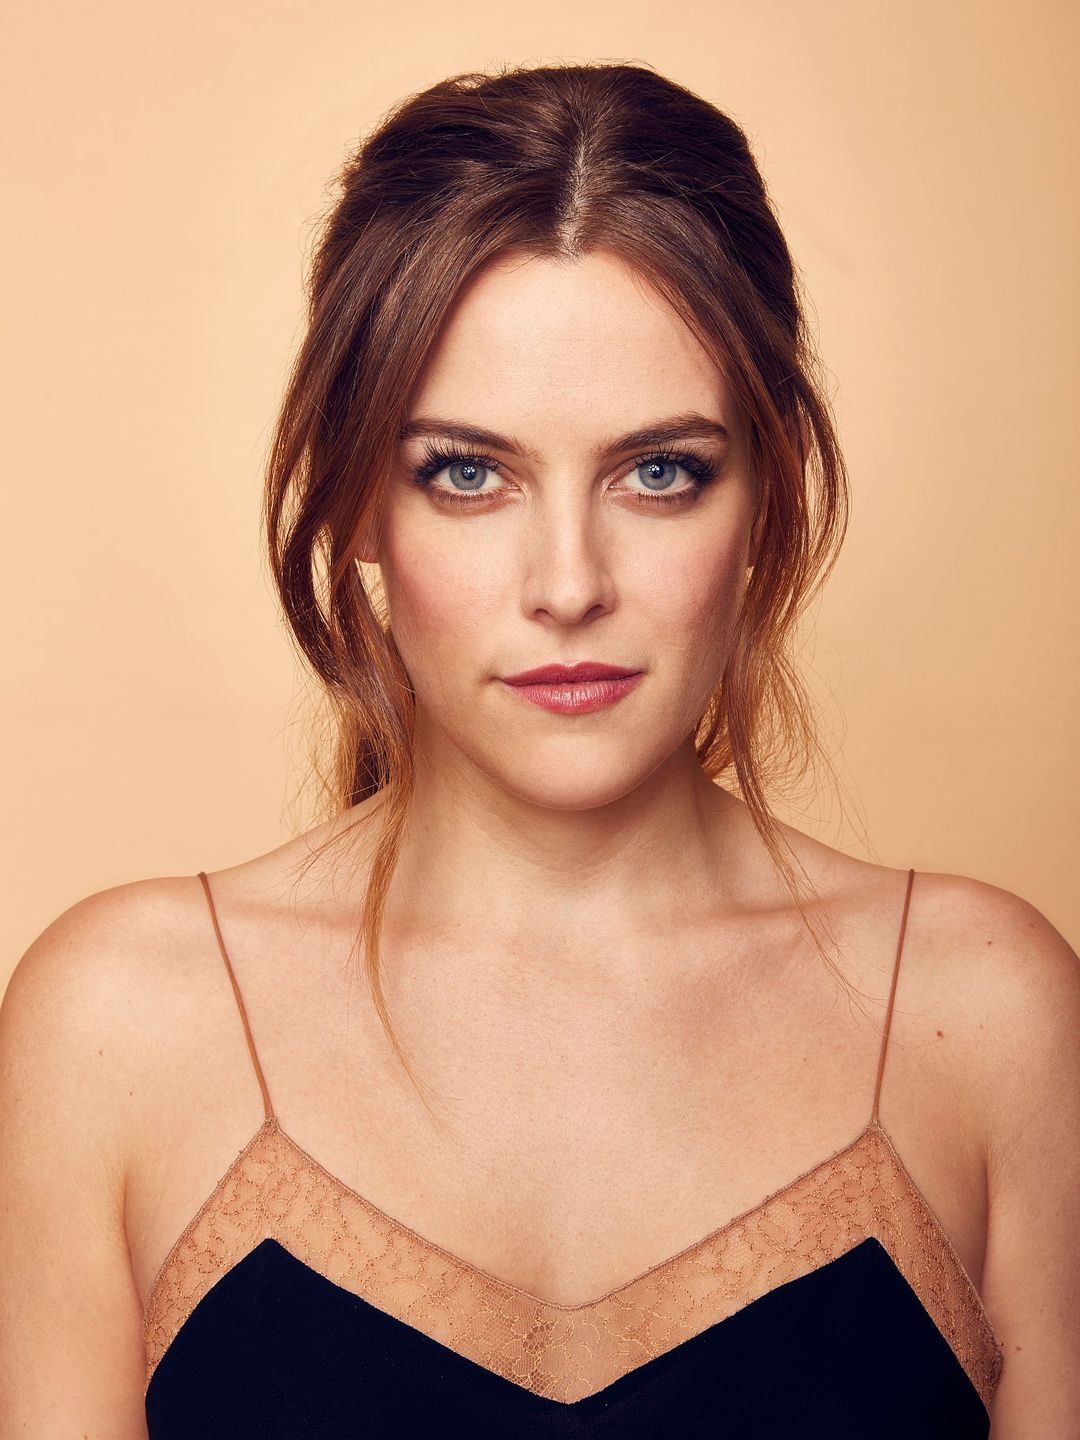 Riley Keough who is she